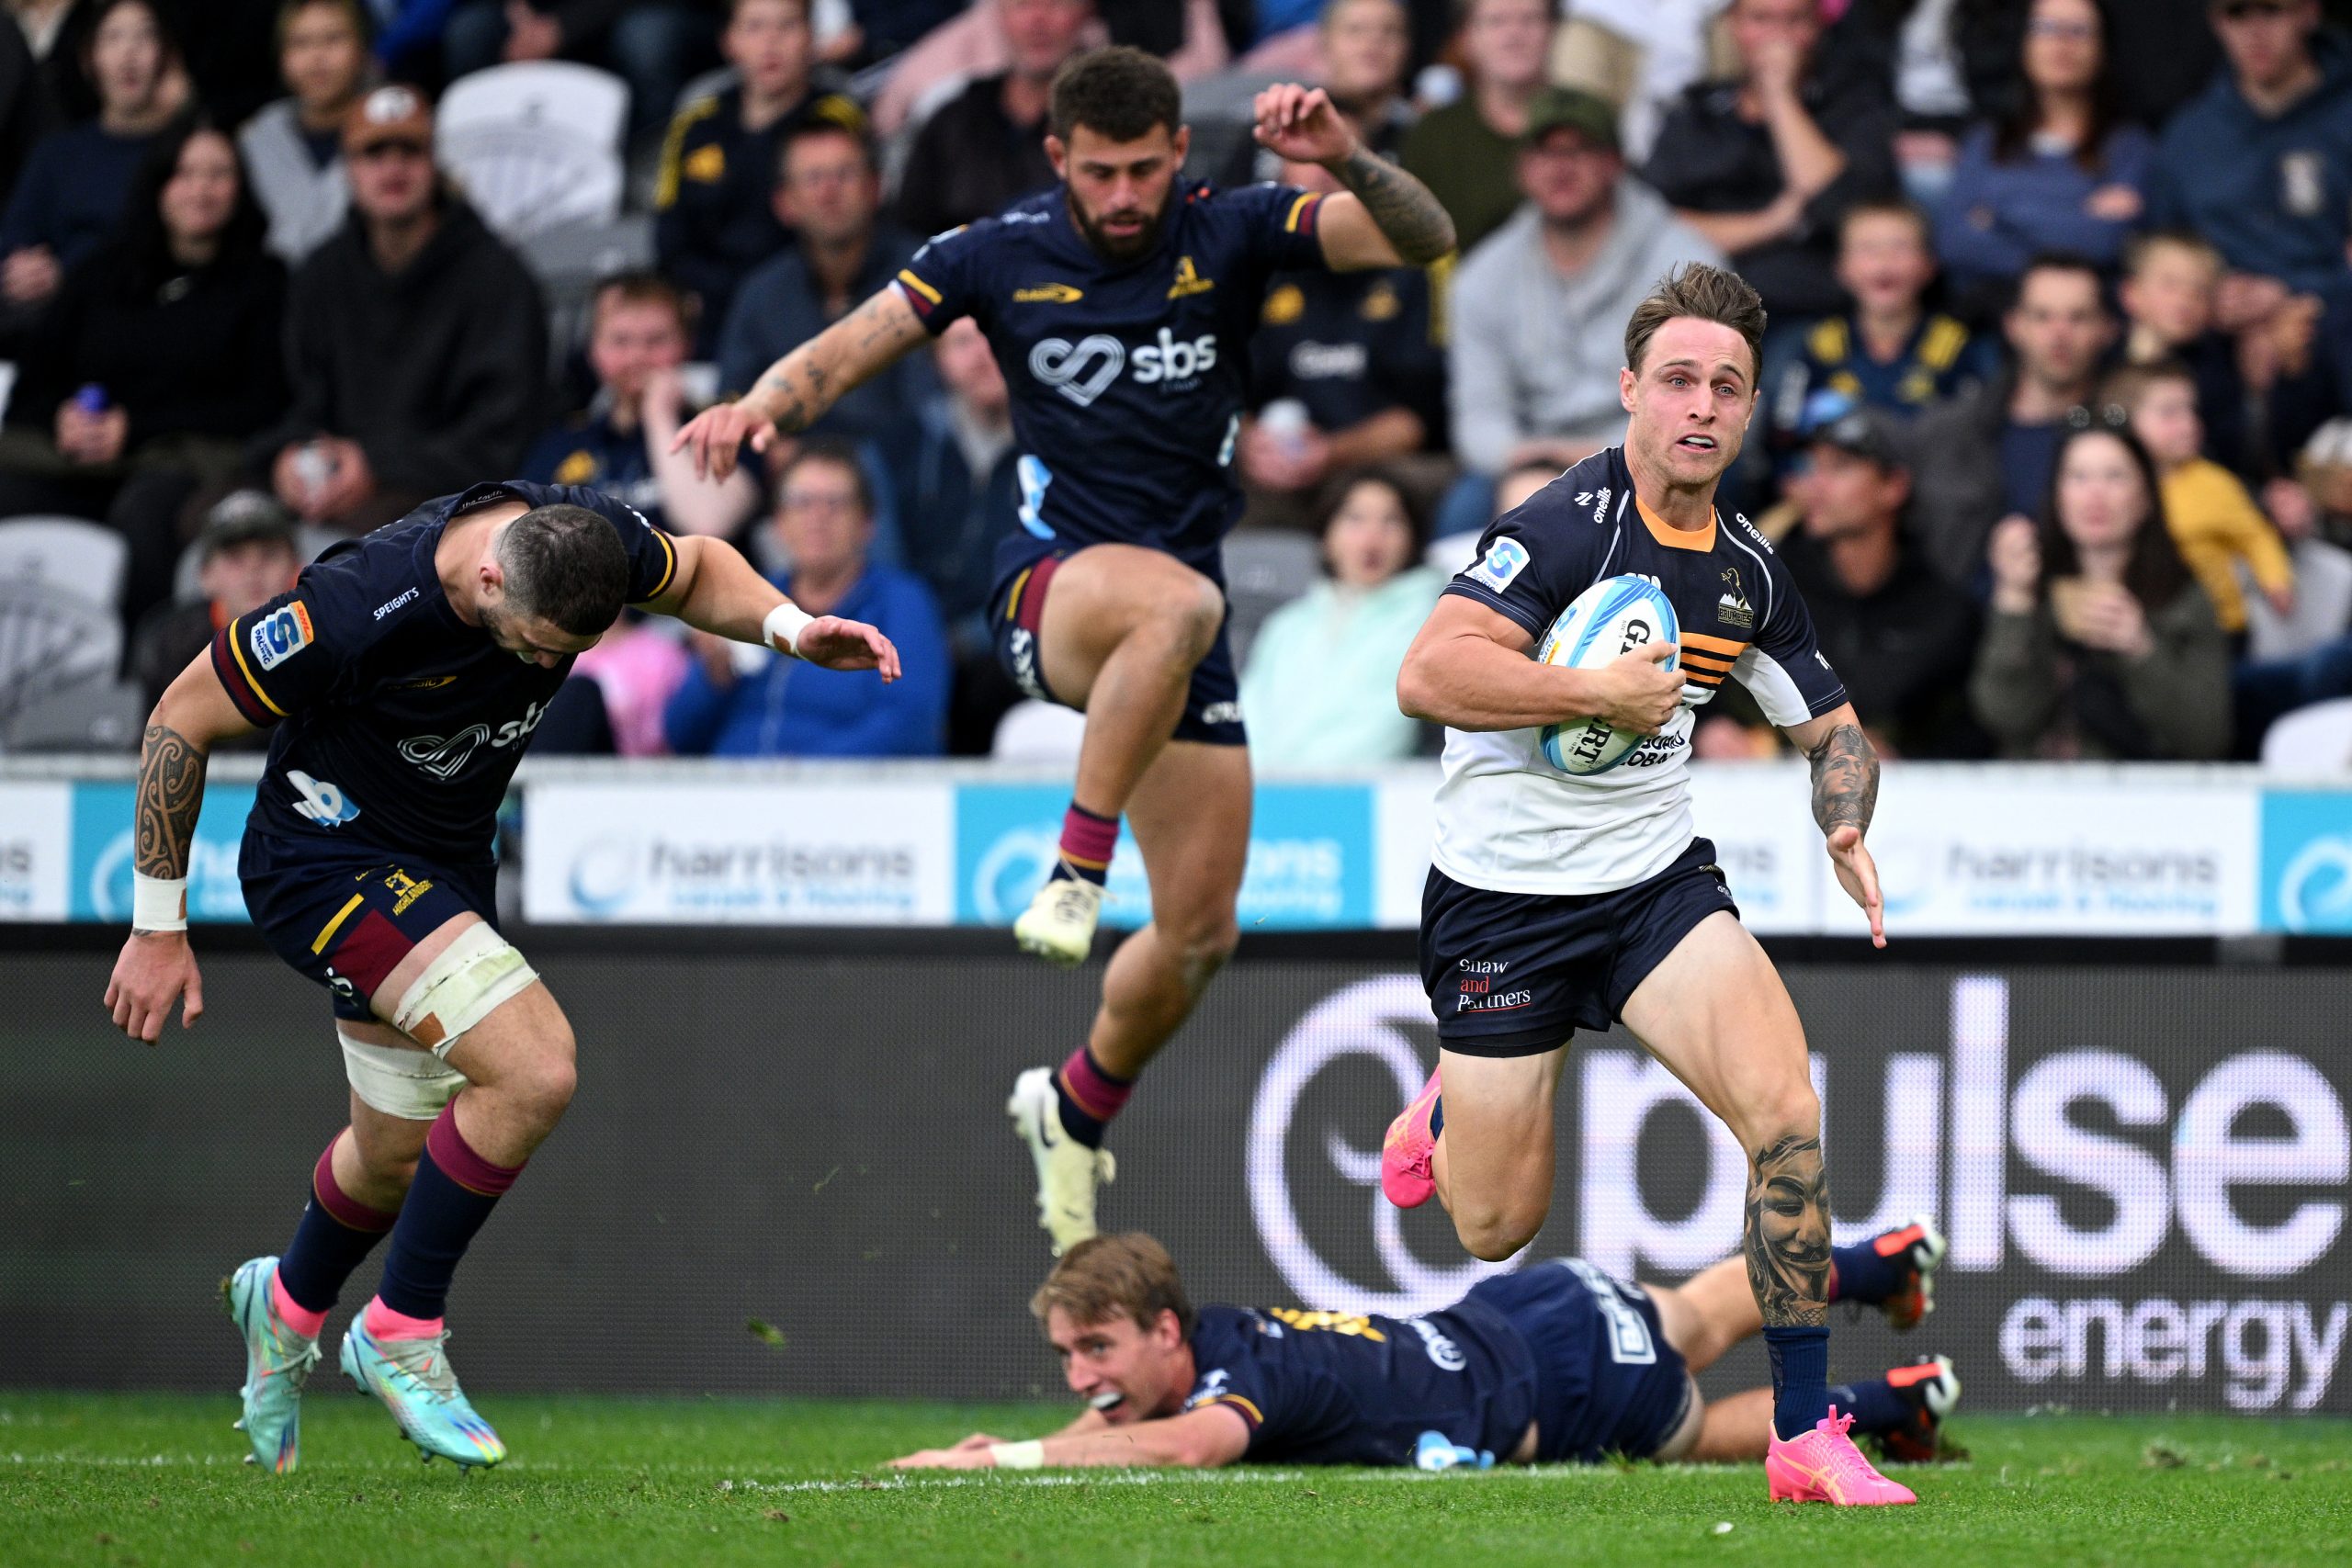 Corey Toole of the Brumbies charges towards the try line to score.